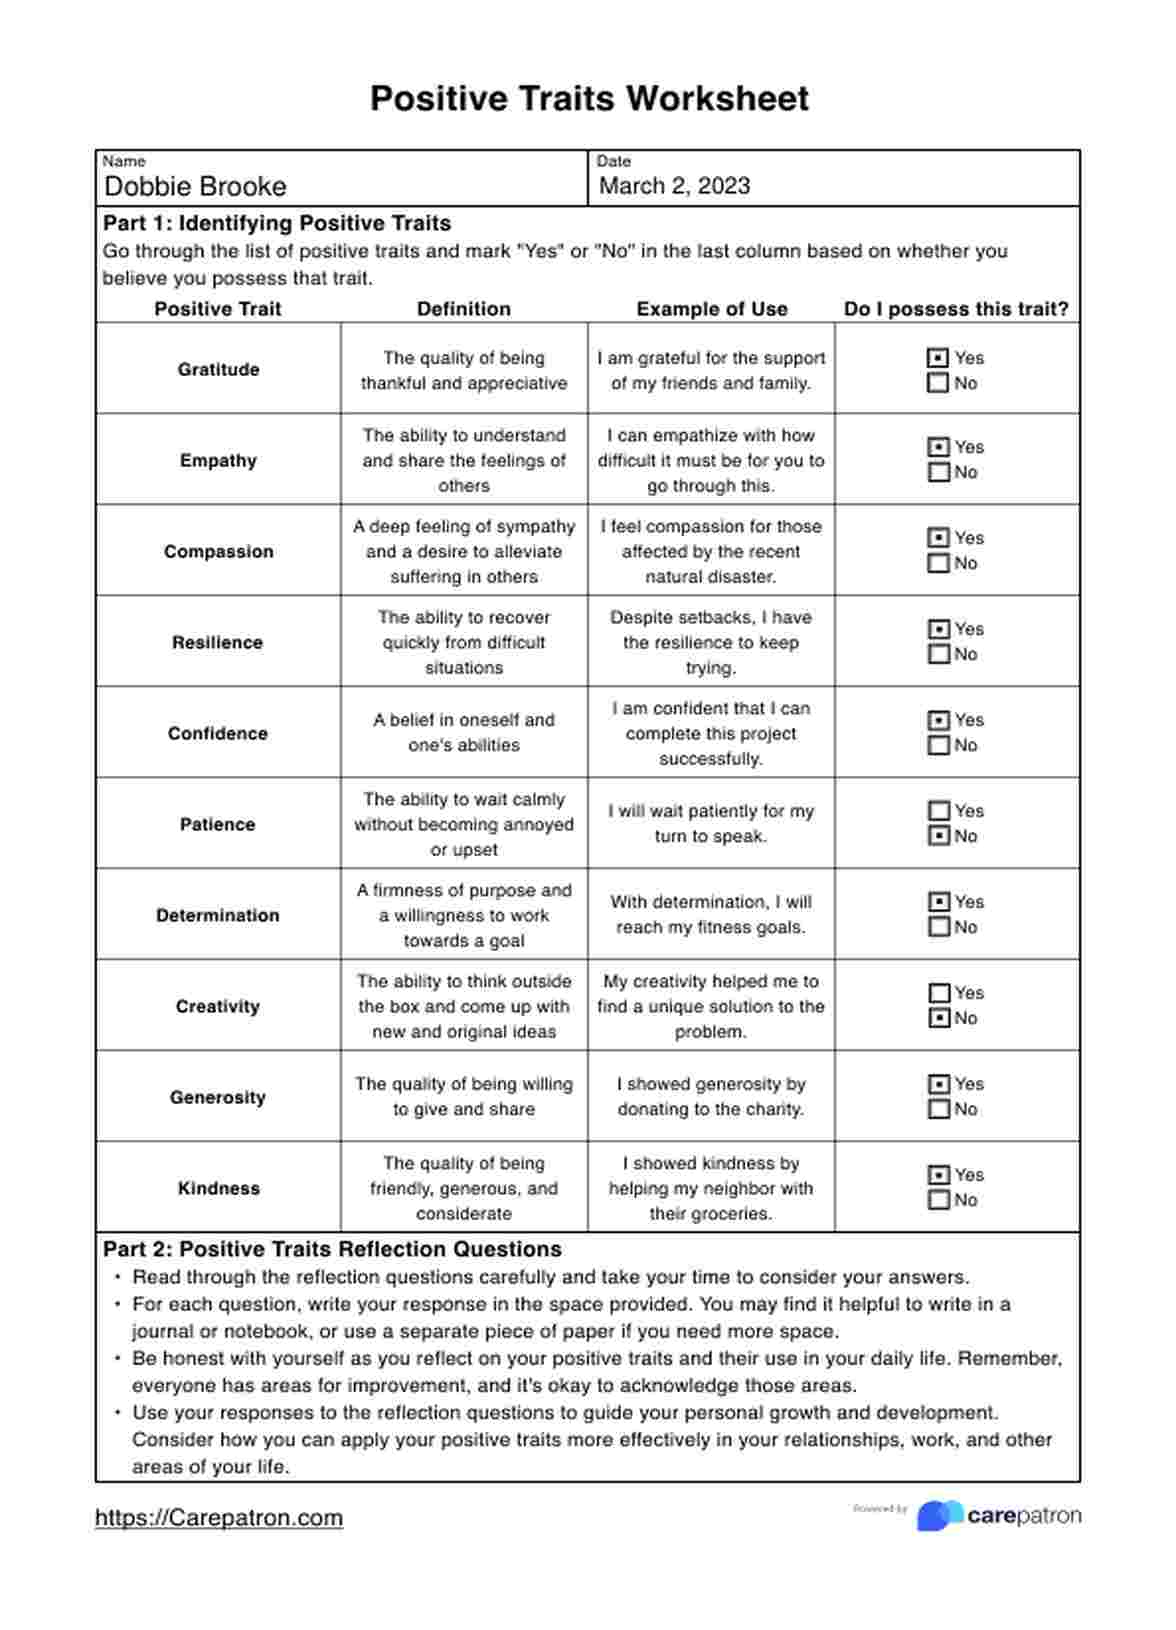 Positive Traits Worksheets PDF Example